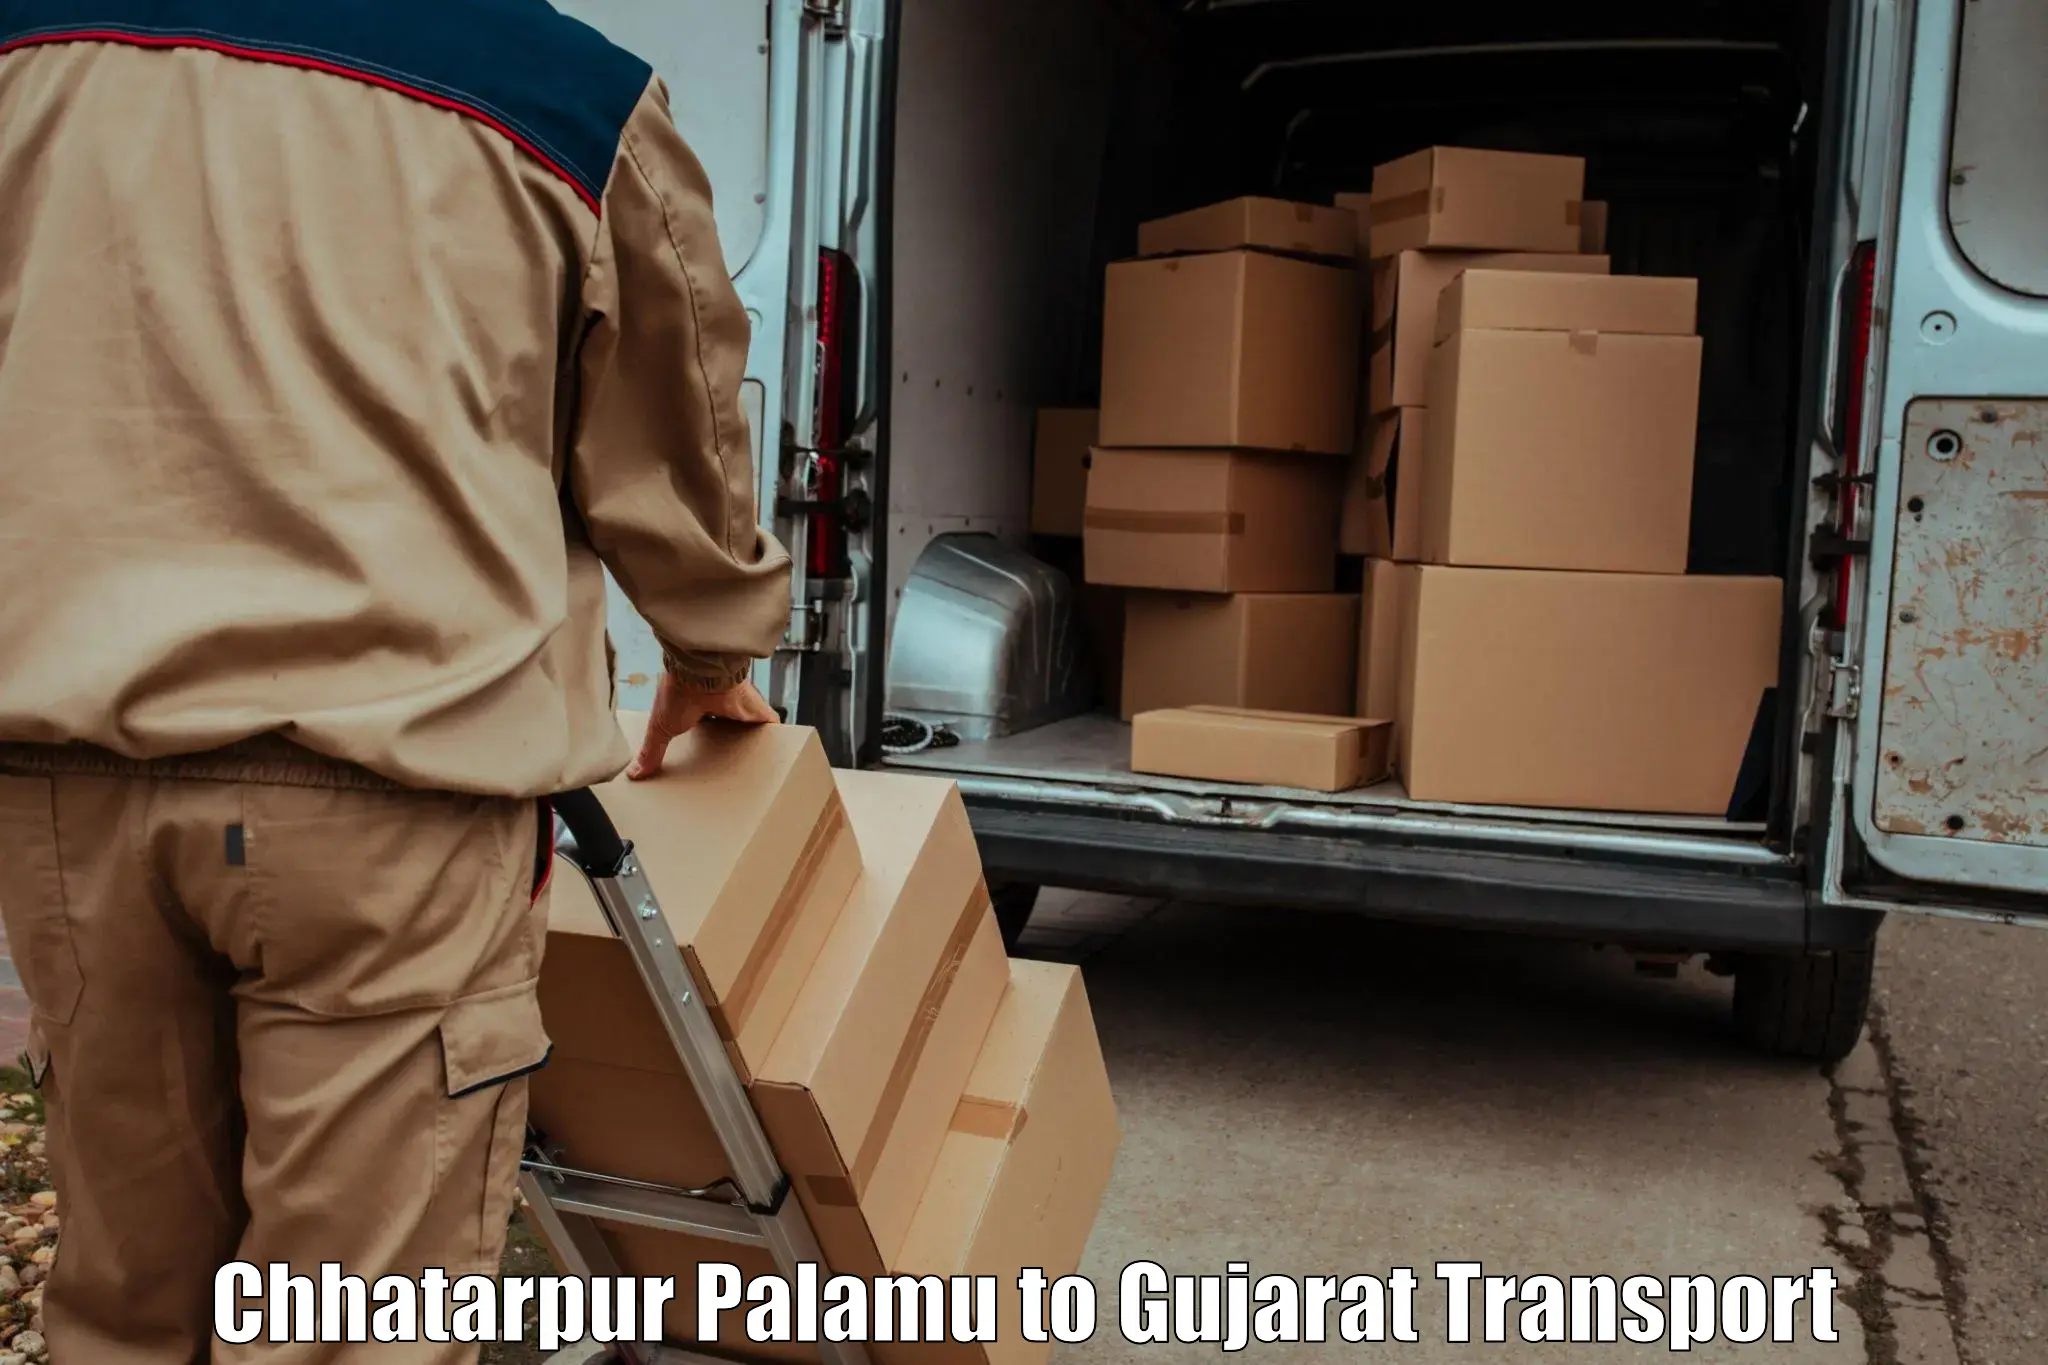 Package delivery services Chhatarpur Palamu to Bopal